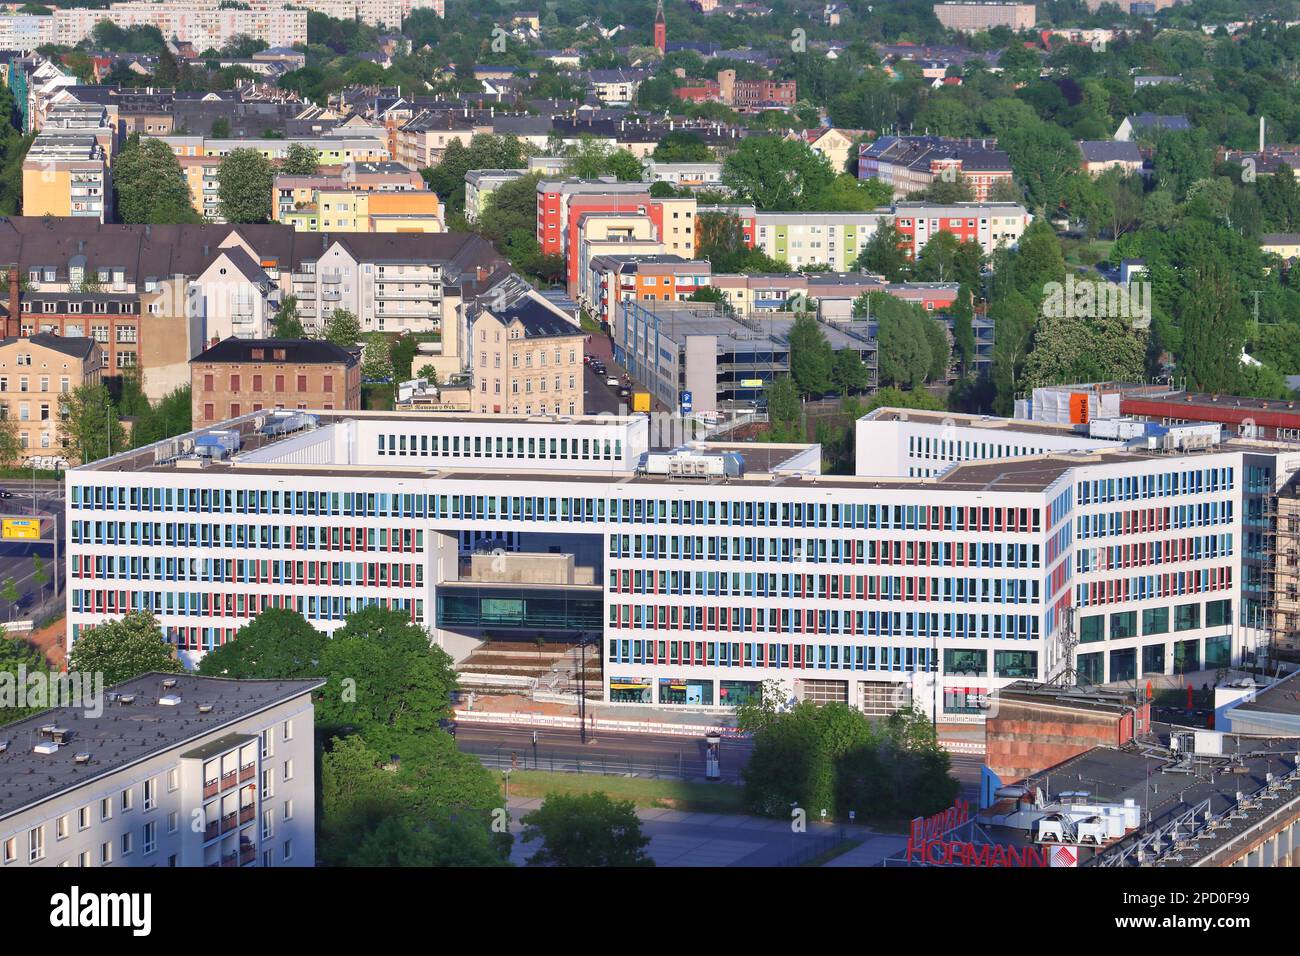 CHEMNITZ, GERMANY - MAY 8, 2018: Technical town hall (Technisches Rathaus) modern building in Chemnitz, Germany. Chemnitz is the 3rd-largest city in t Stock Photo